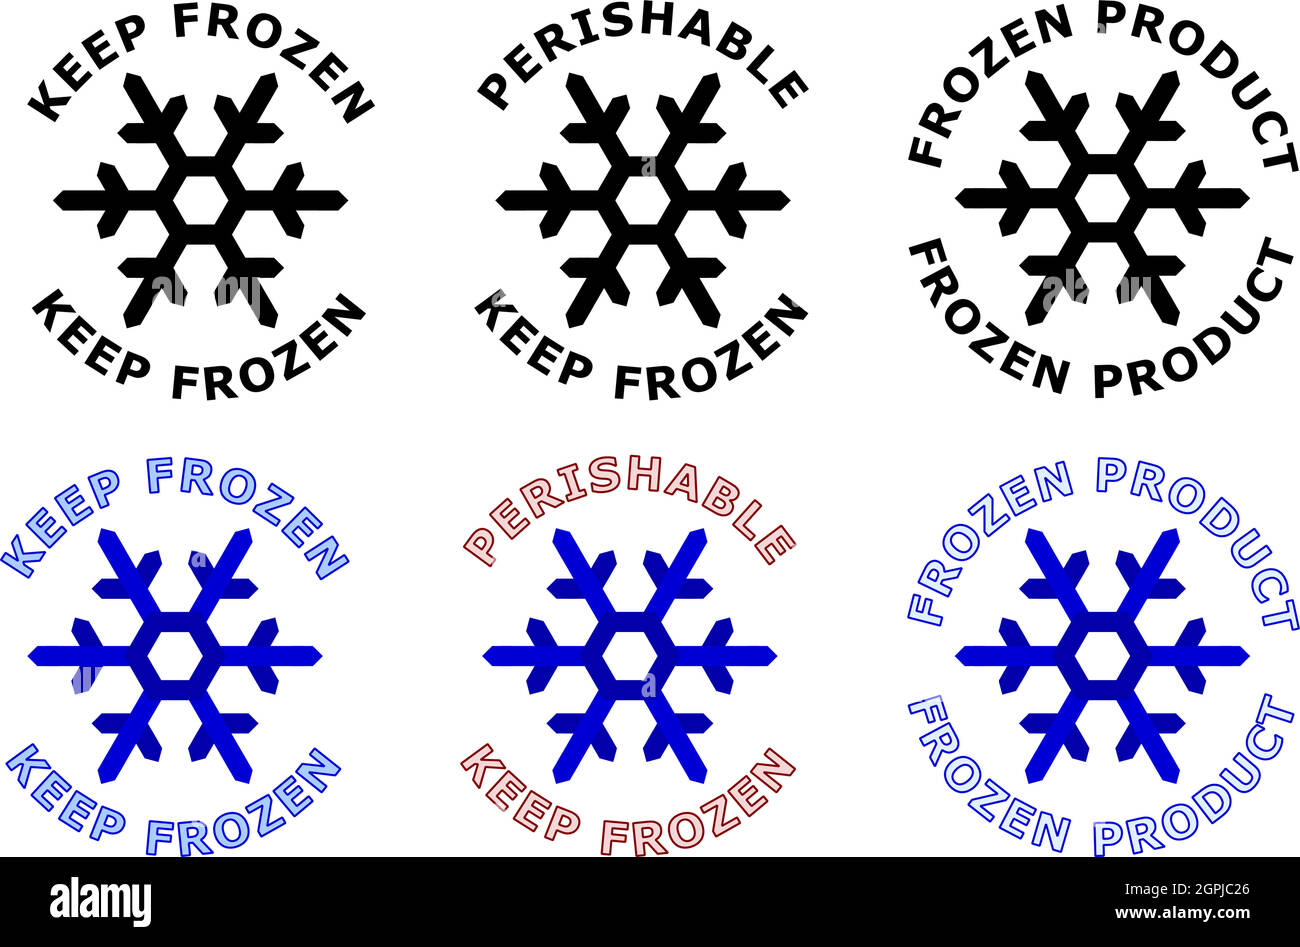 Keep frozen sign. Snowflake symbol with text around it. Black, white and blue color version. Stock Vector